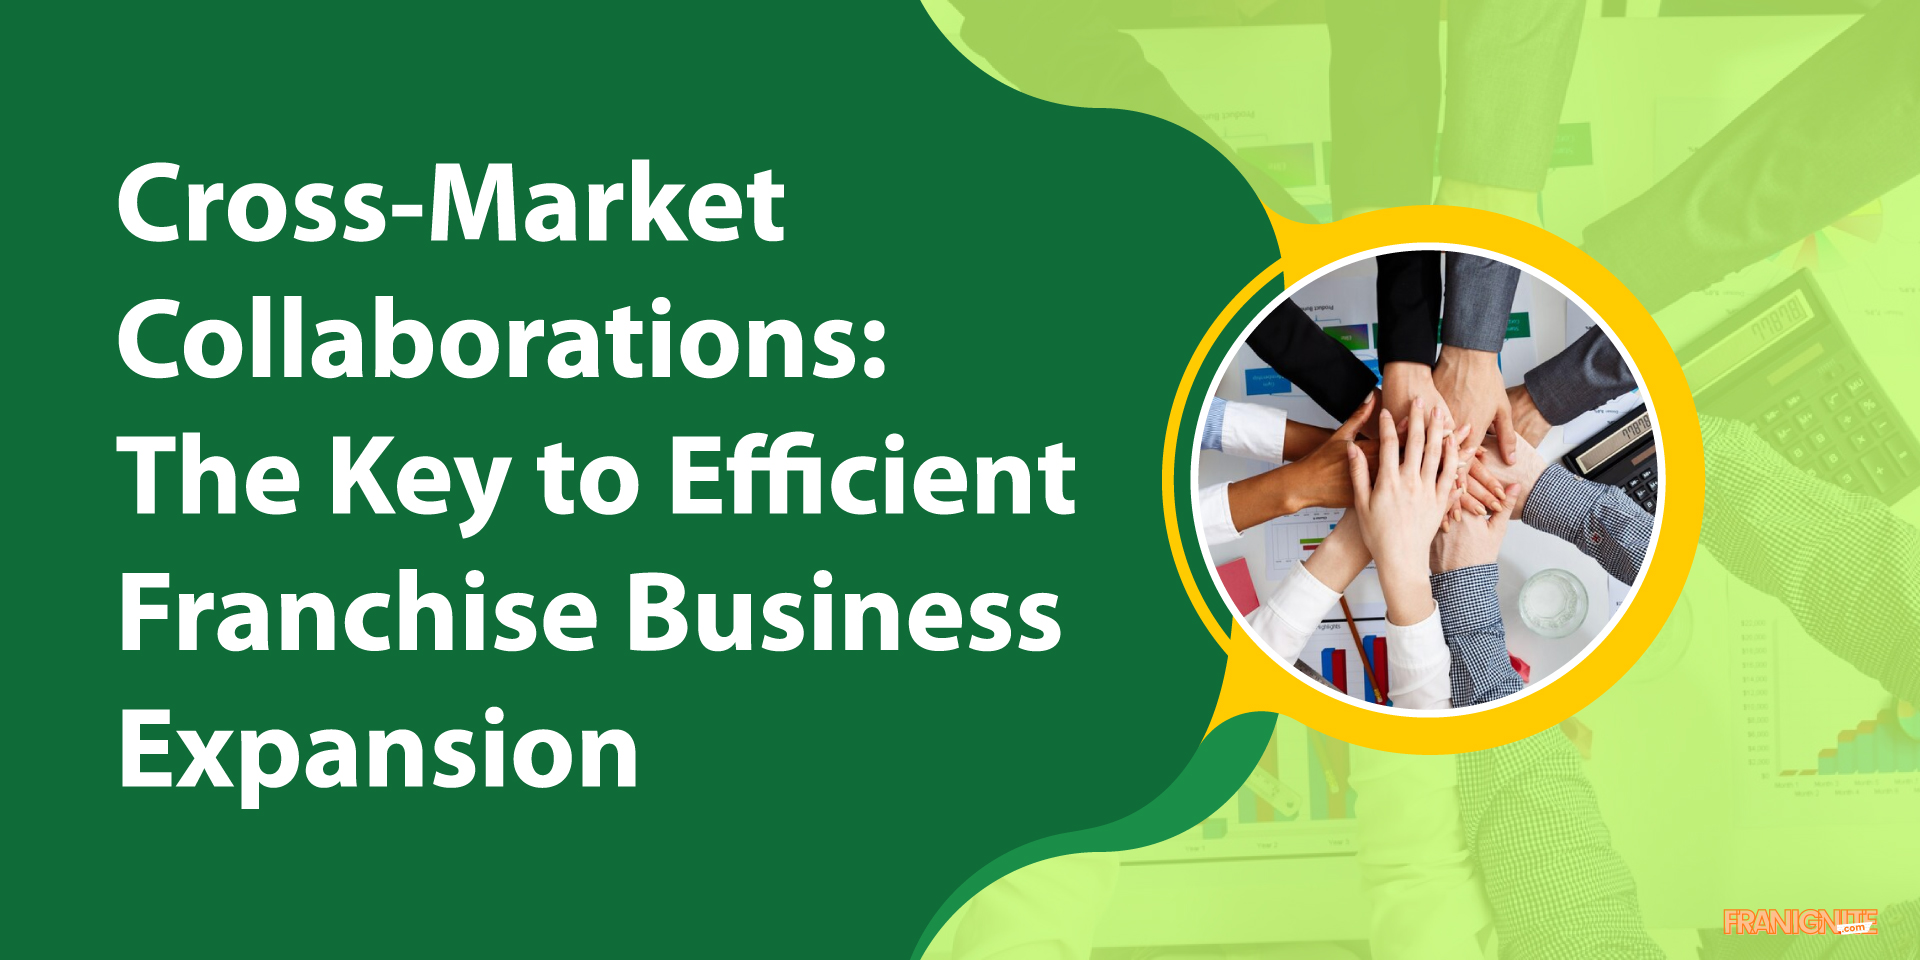 Cross-Market Collaborations: The Key to Efficient Franchise Business Expansion